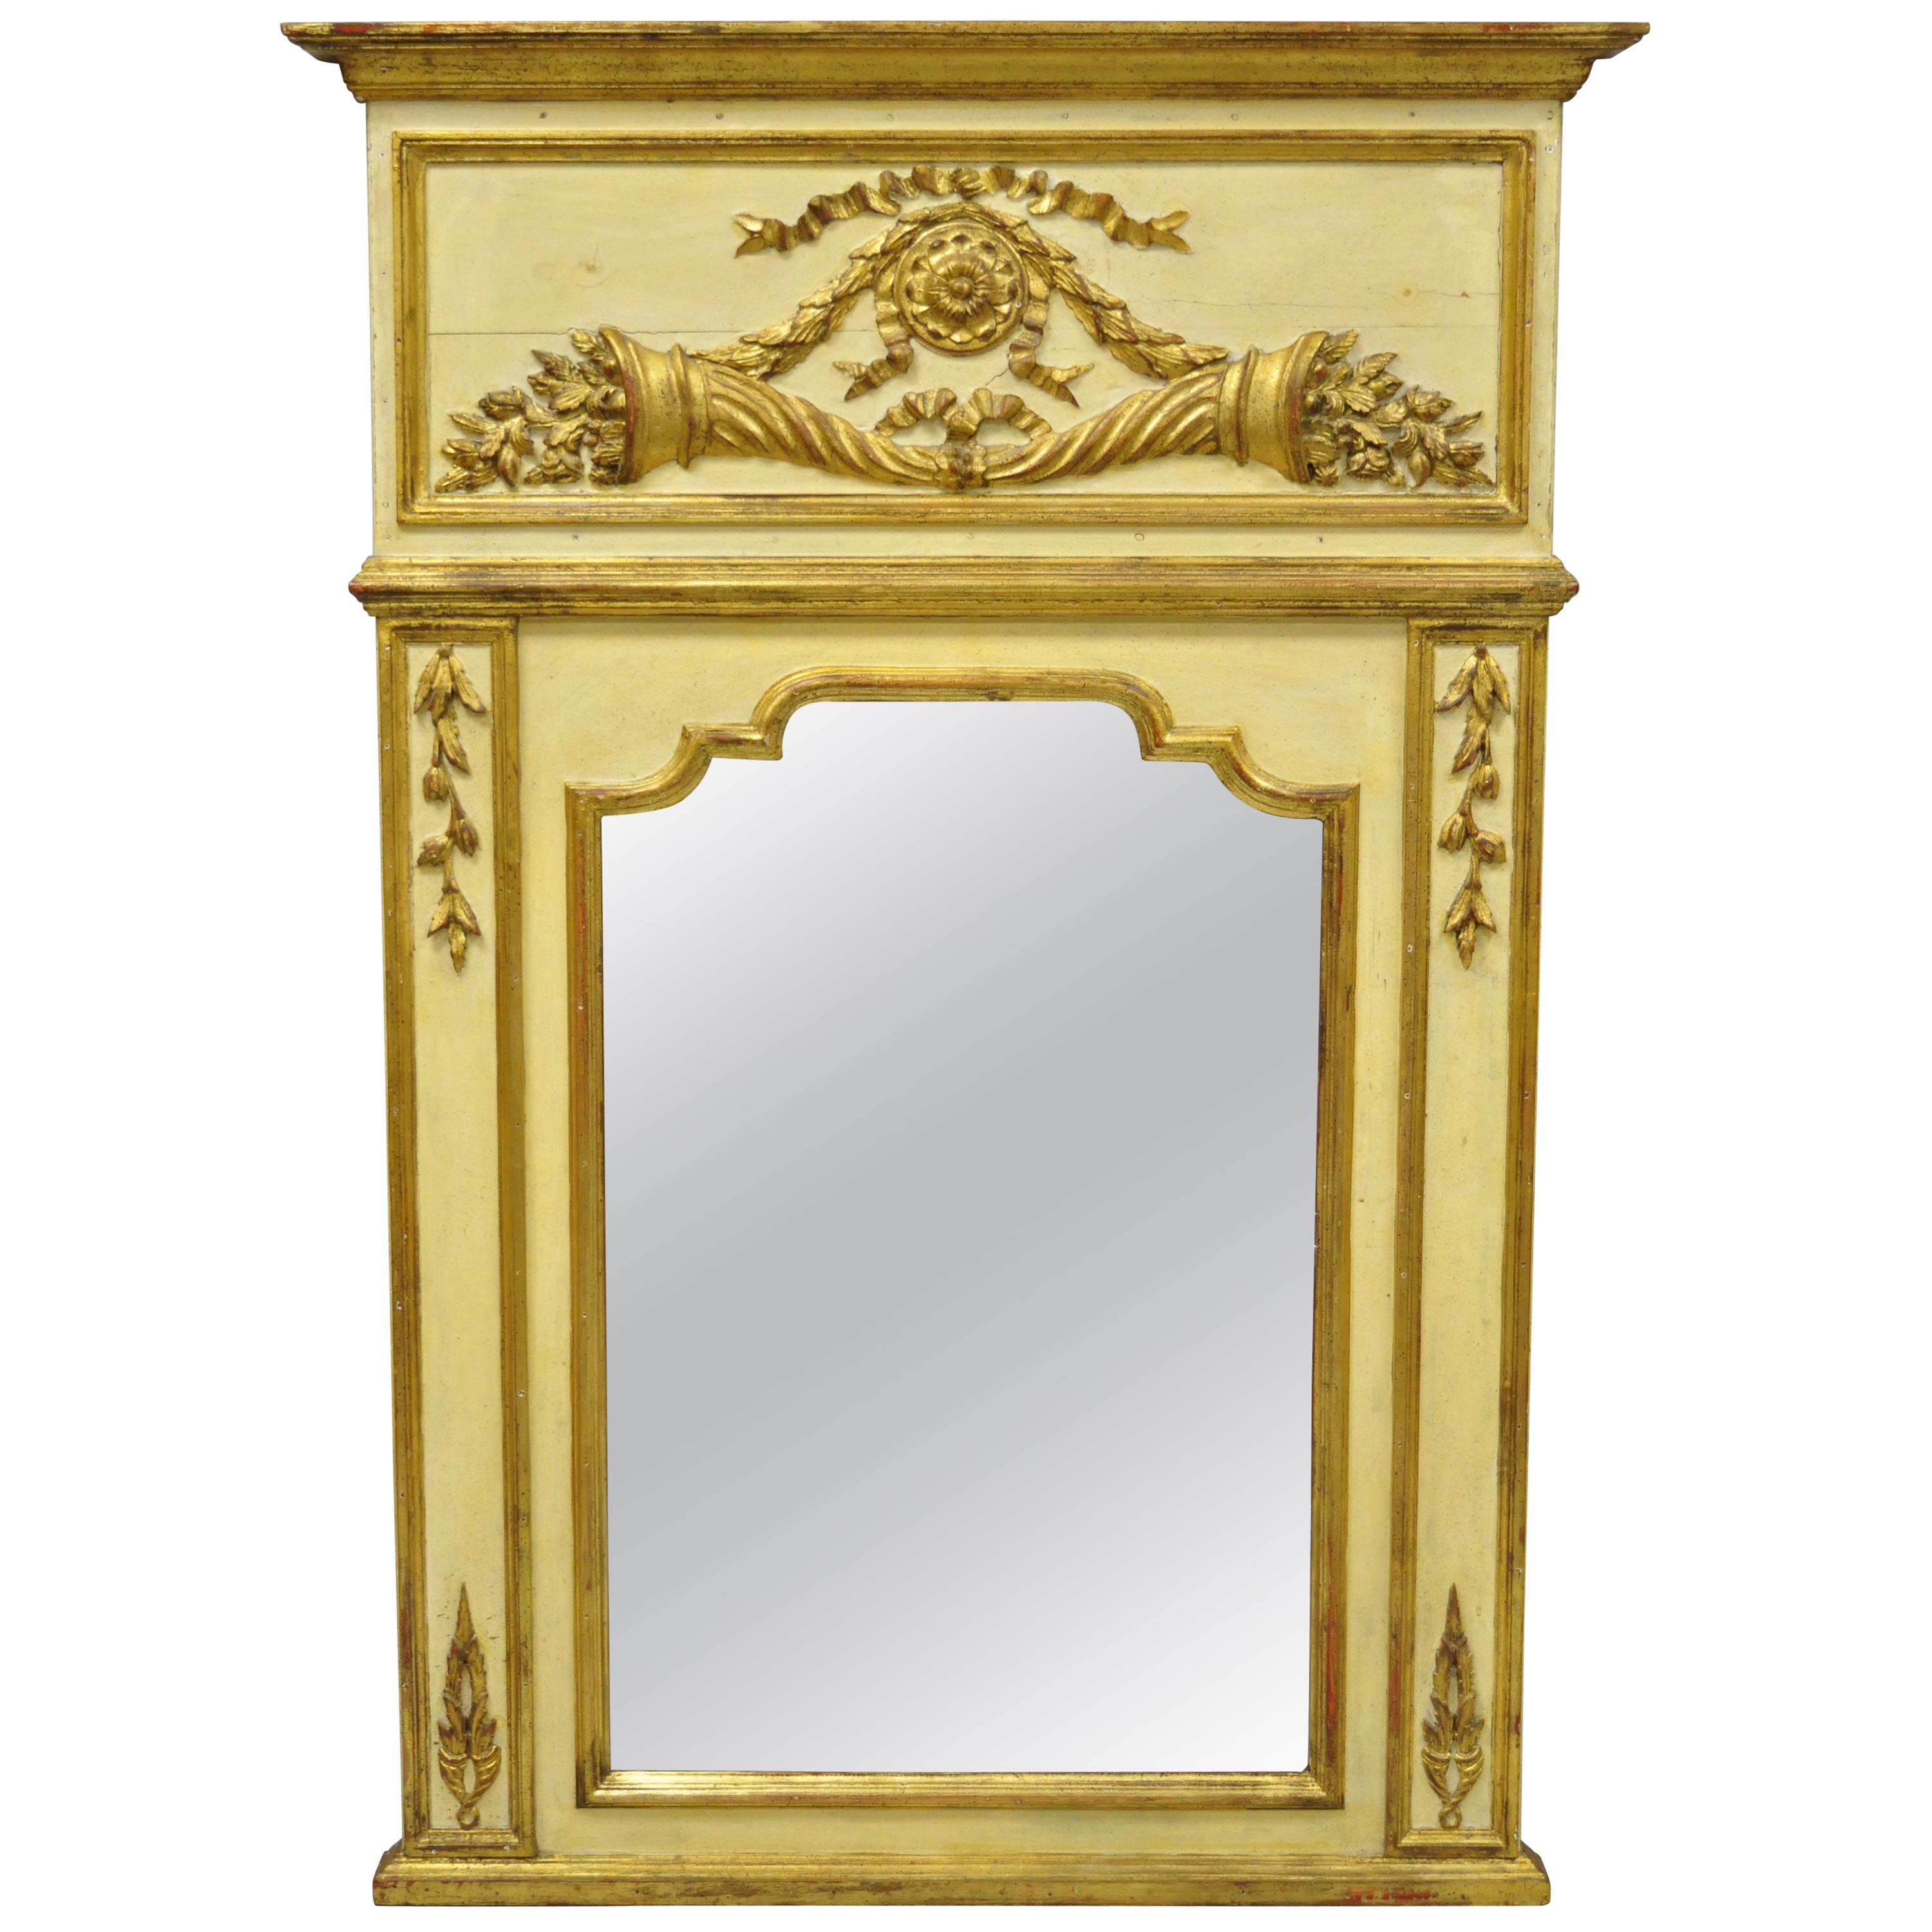 Antique Italian Neoclassical Gold Giltwood Large Trumeau Wall Mirror